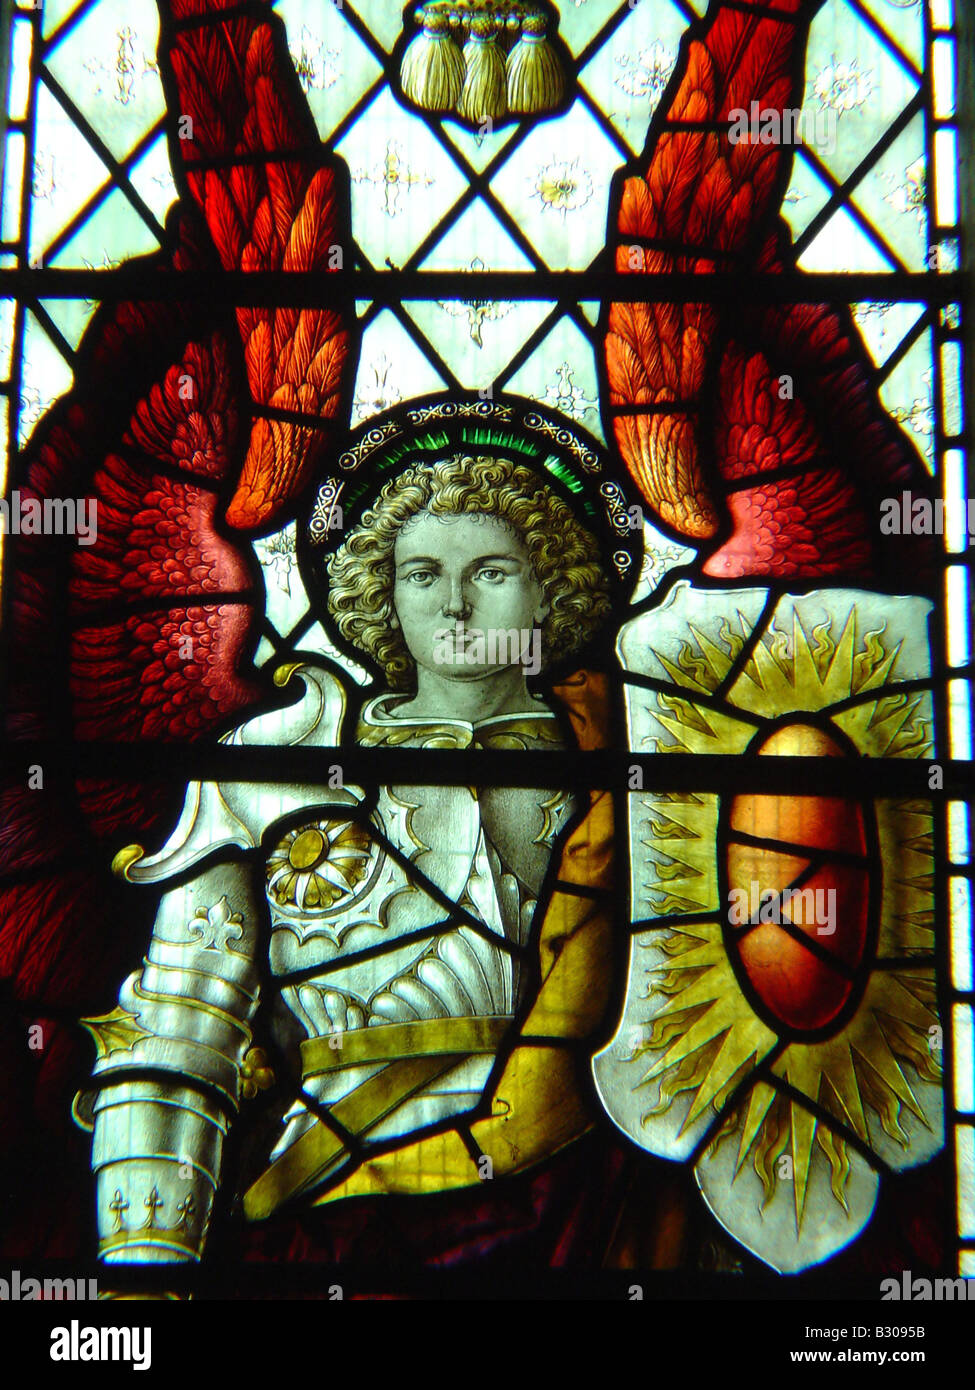 st-michael-stained-glass-window-stock-photo-alamy